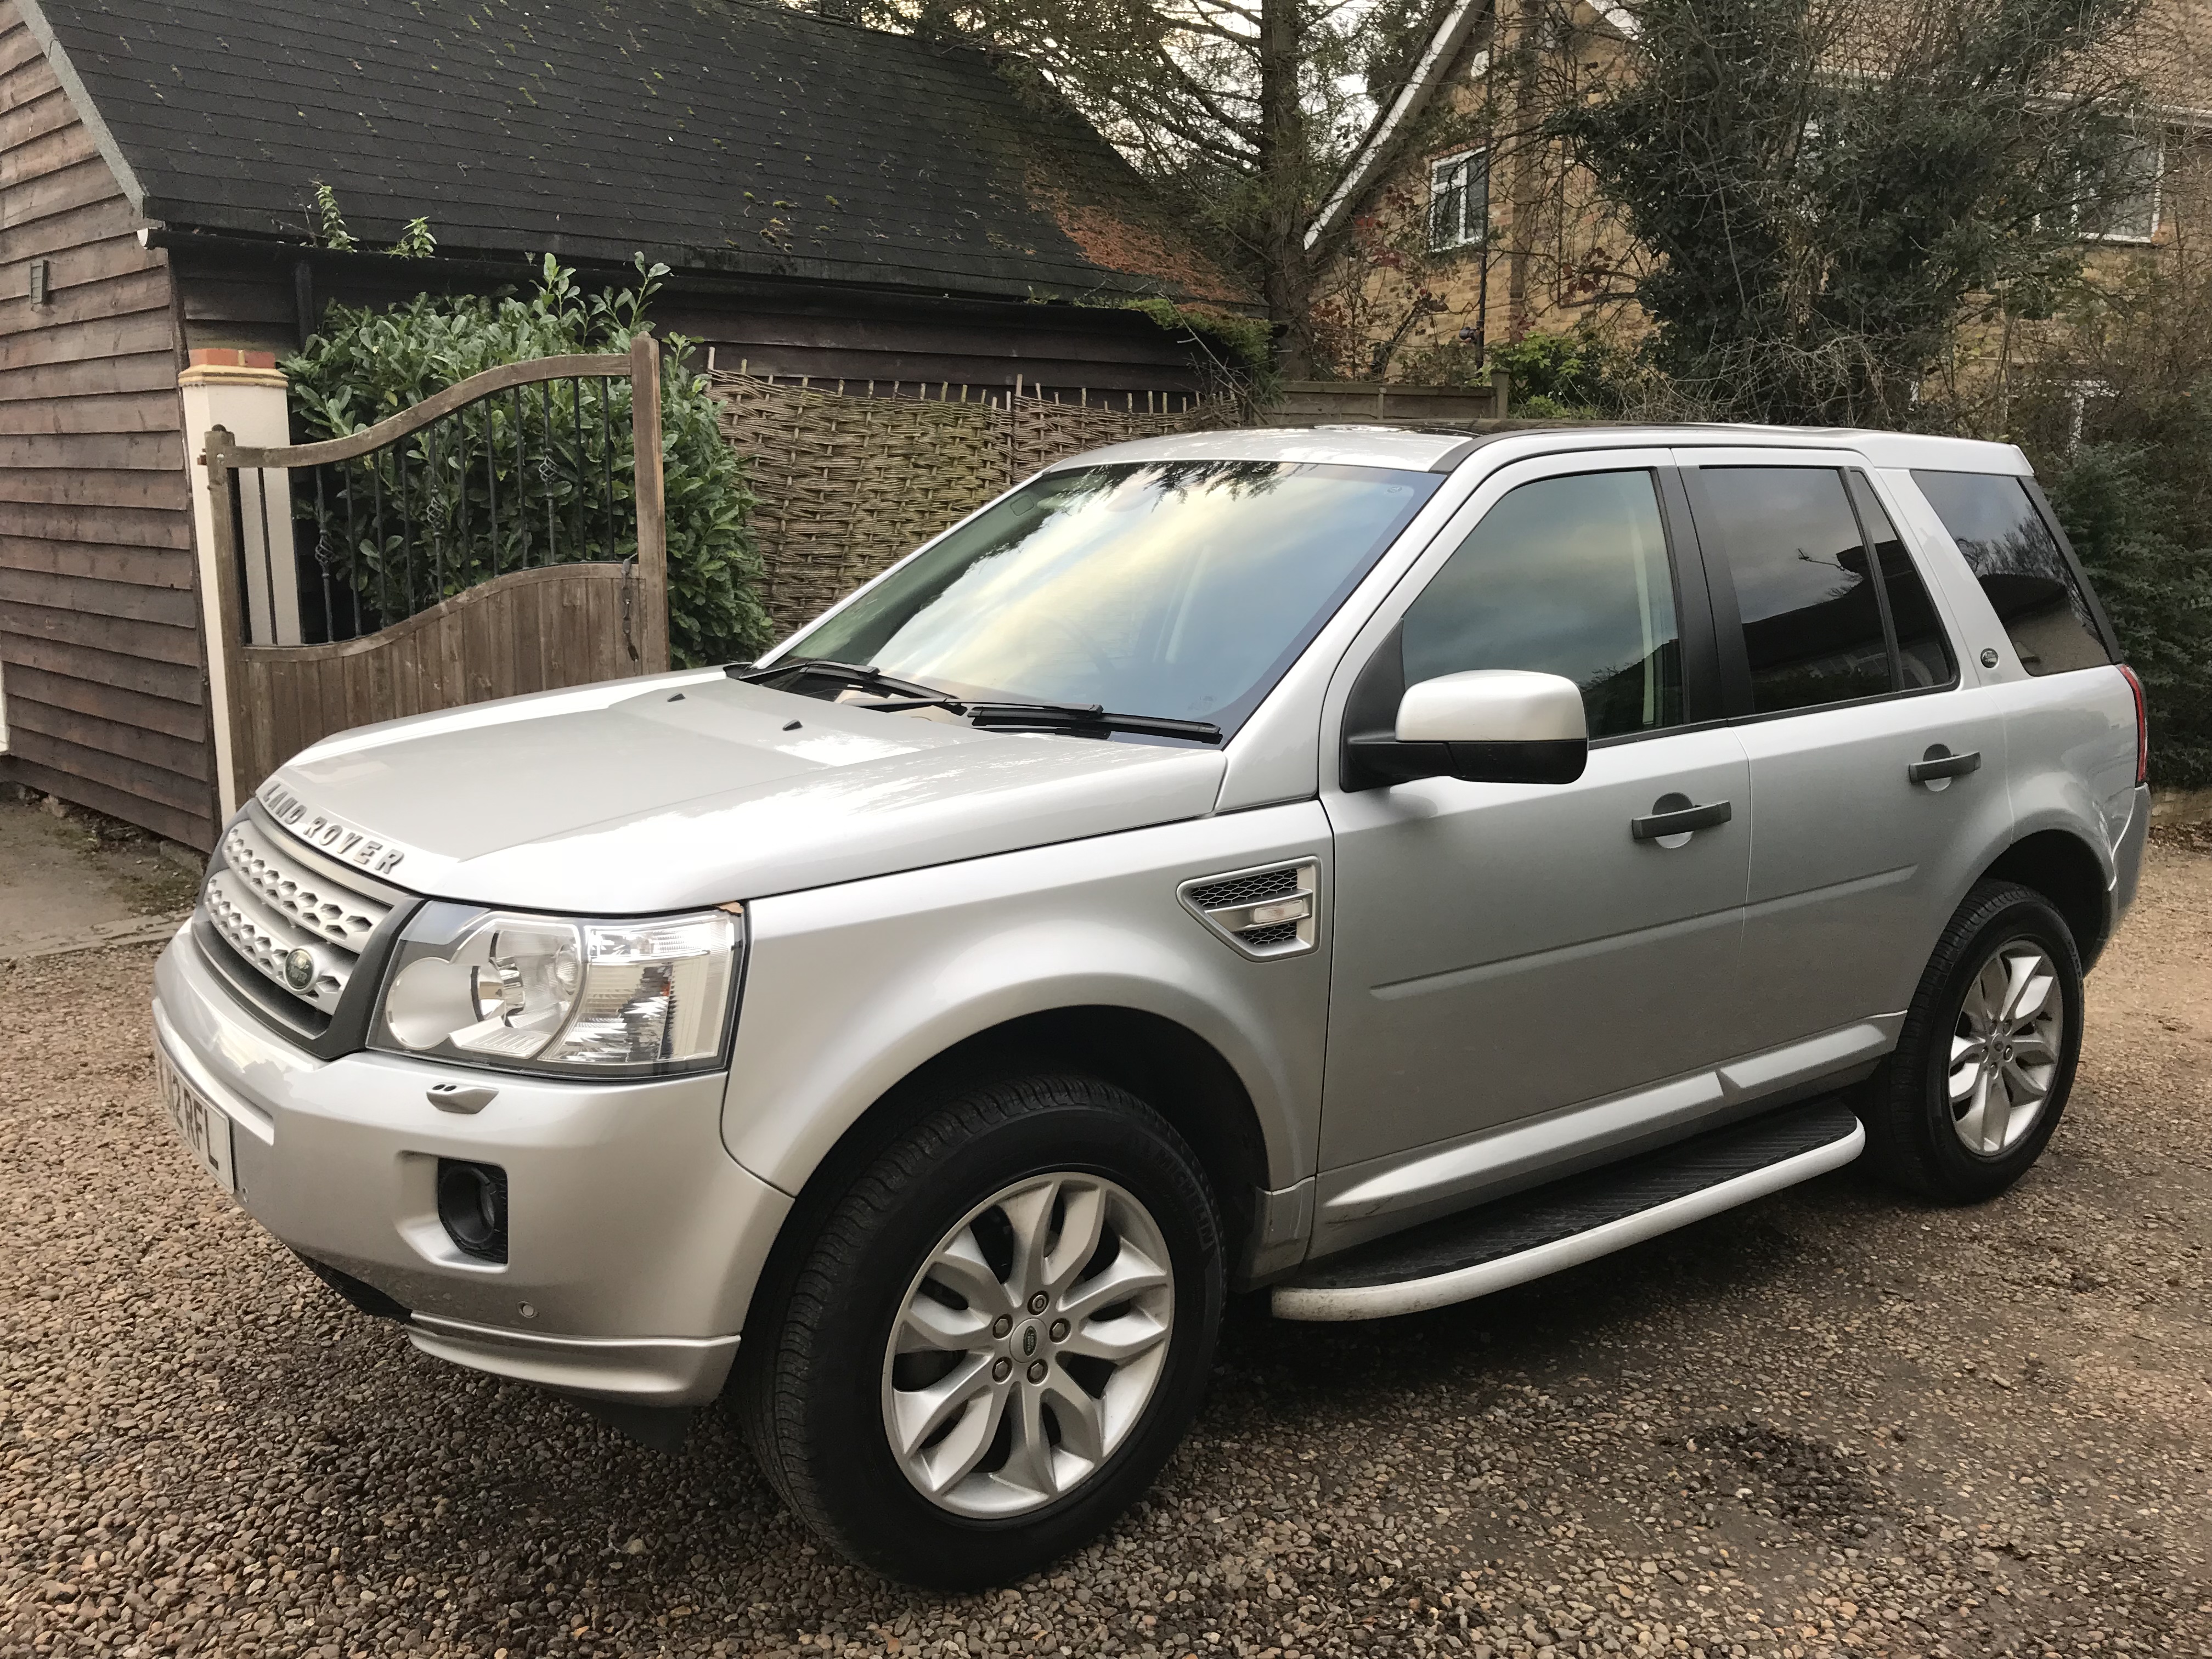 Land Rover Freelander 2 2.2 SD4 HSE AUTOMATIC GS Vehicle